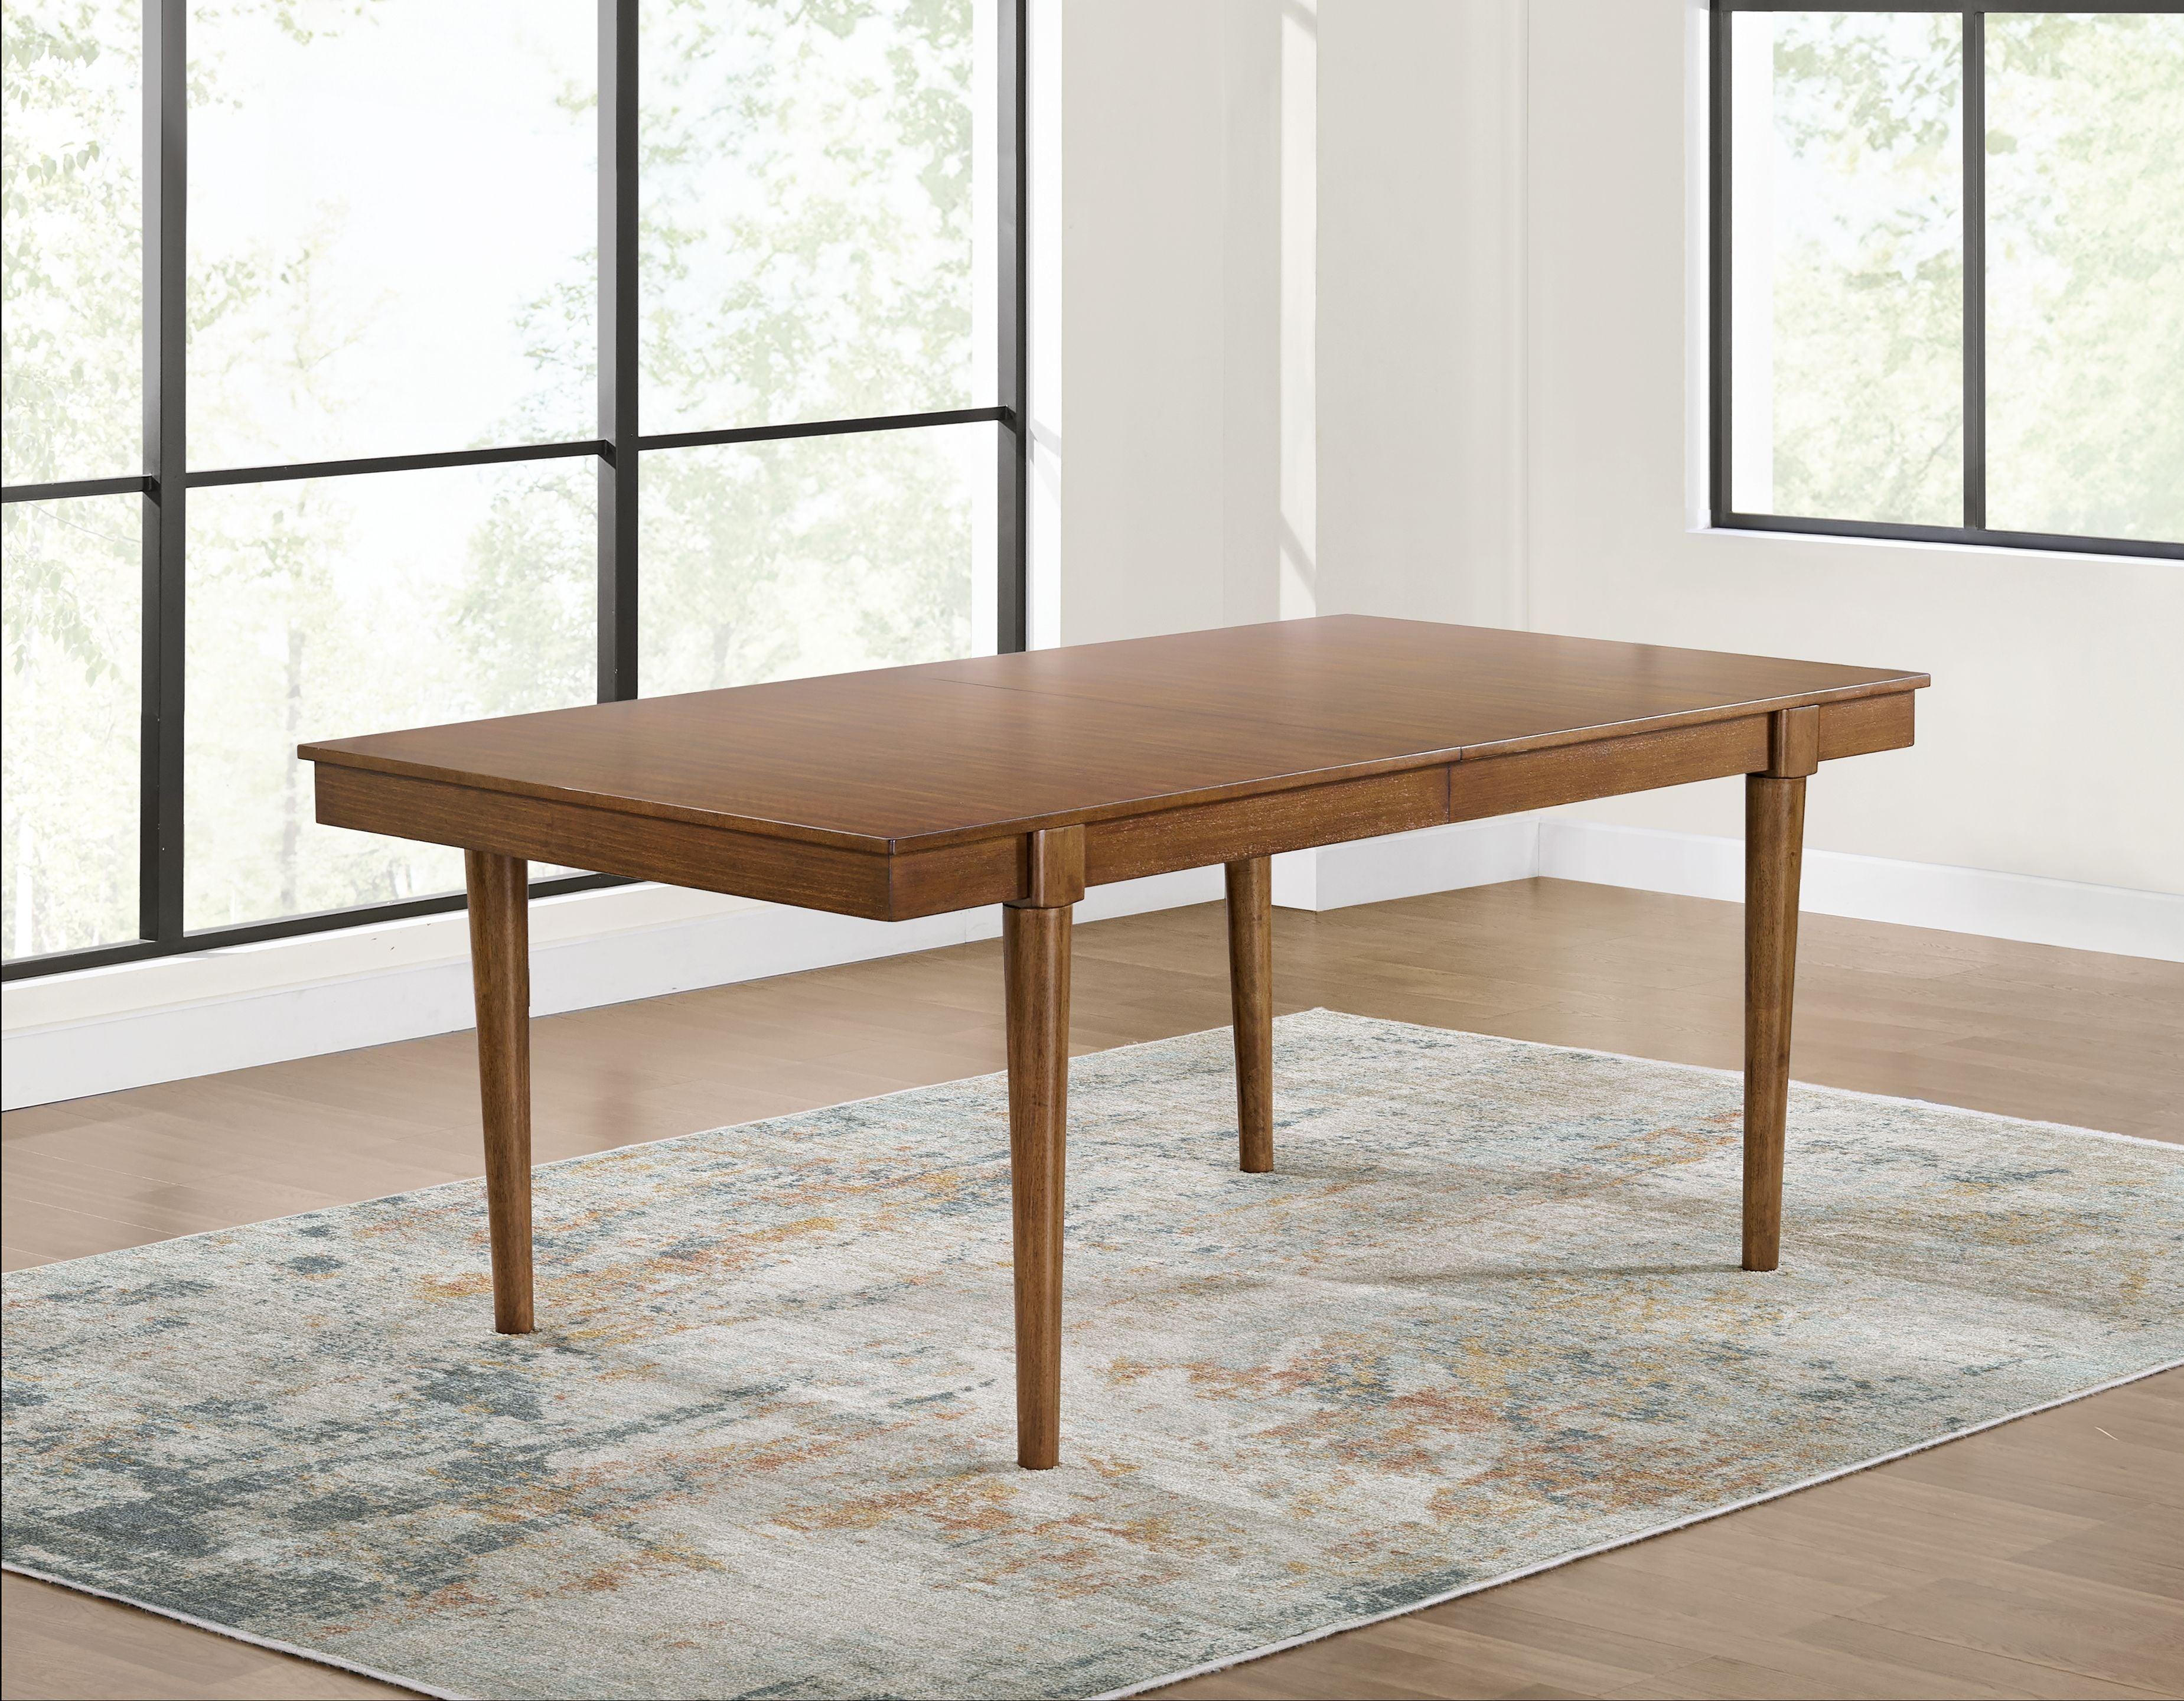 Signature Design by Ashley® - Lyncott - Brown - Rectangular Dining Room Extension Table - 5th Avenue Furniture